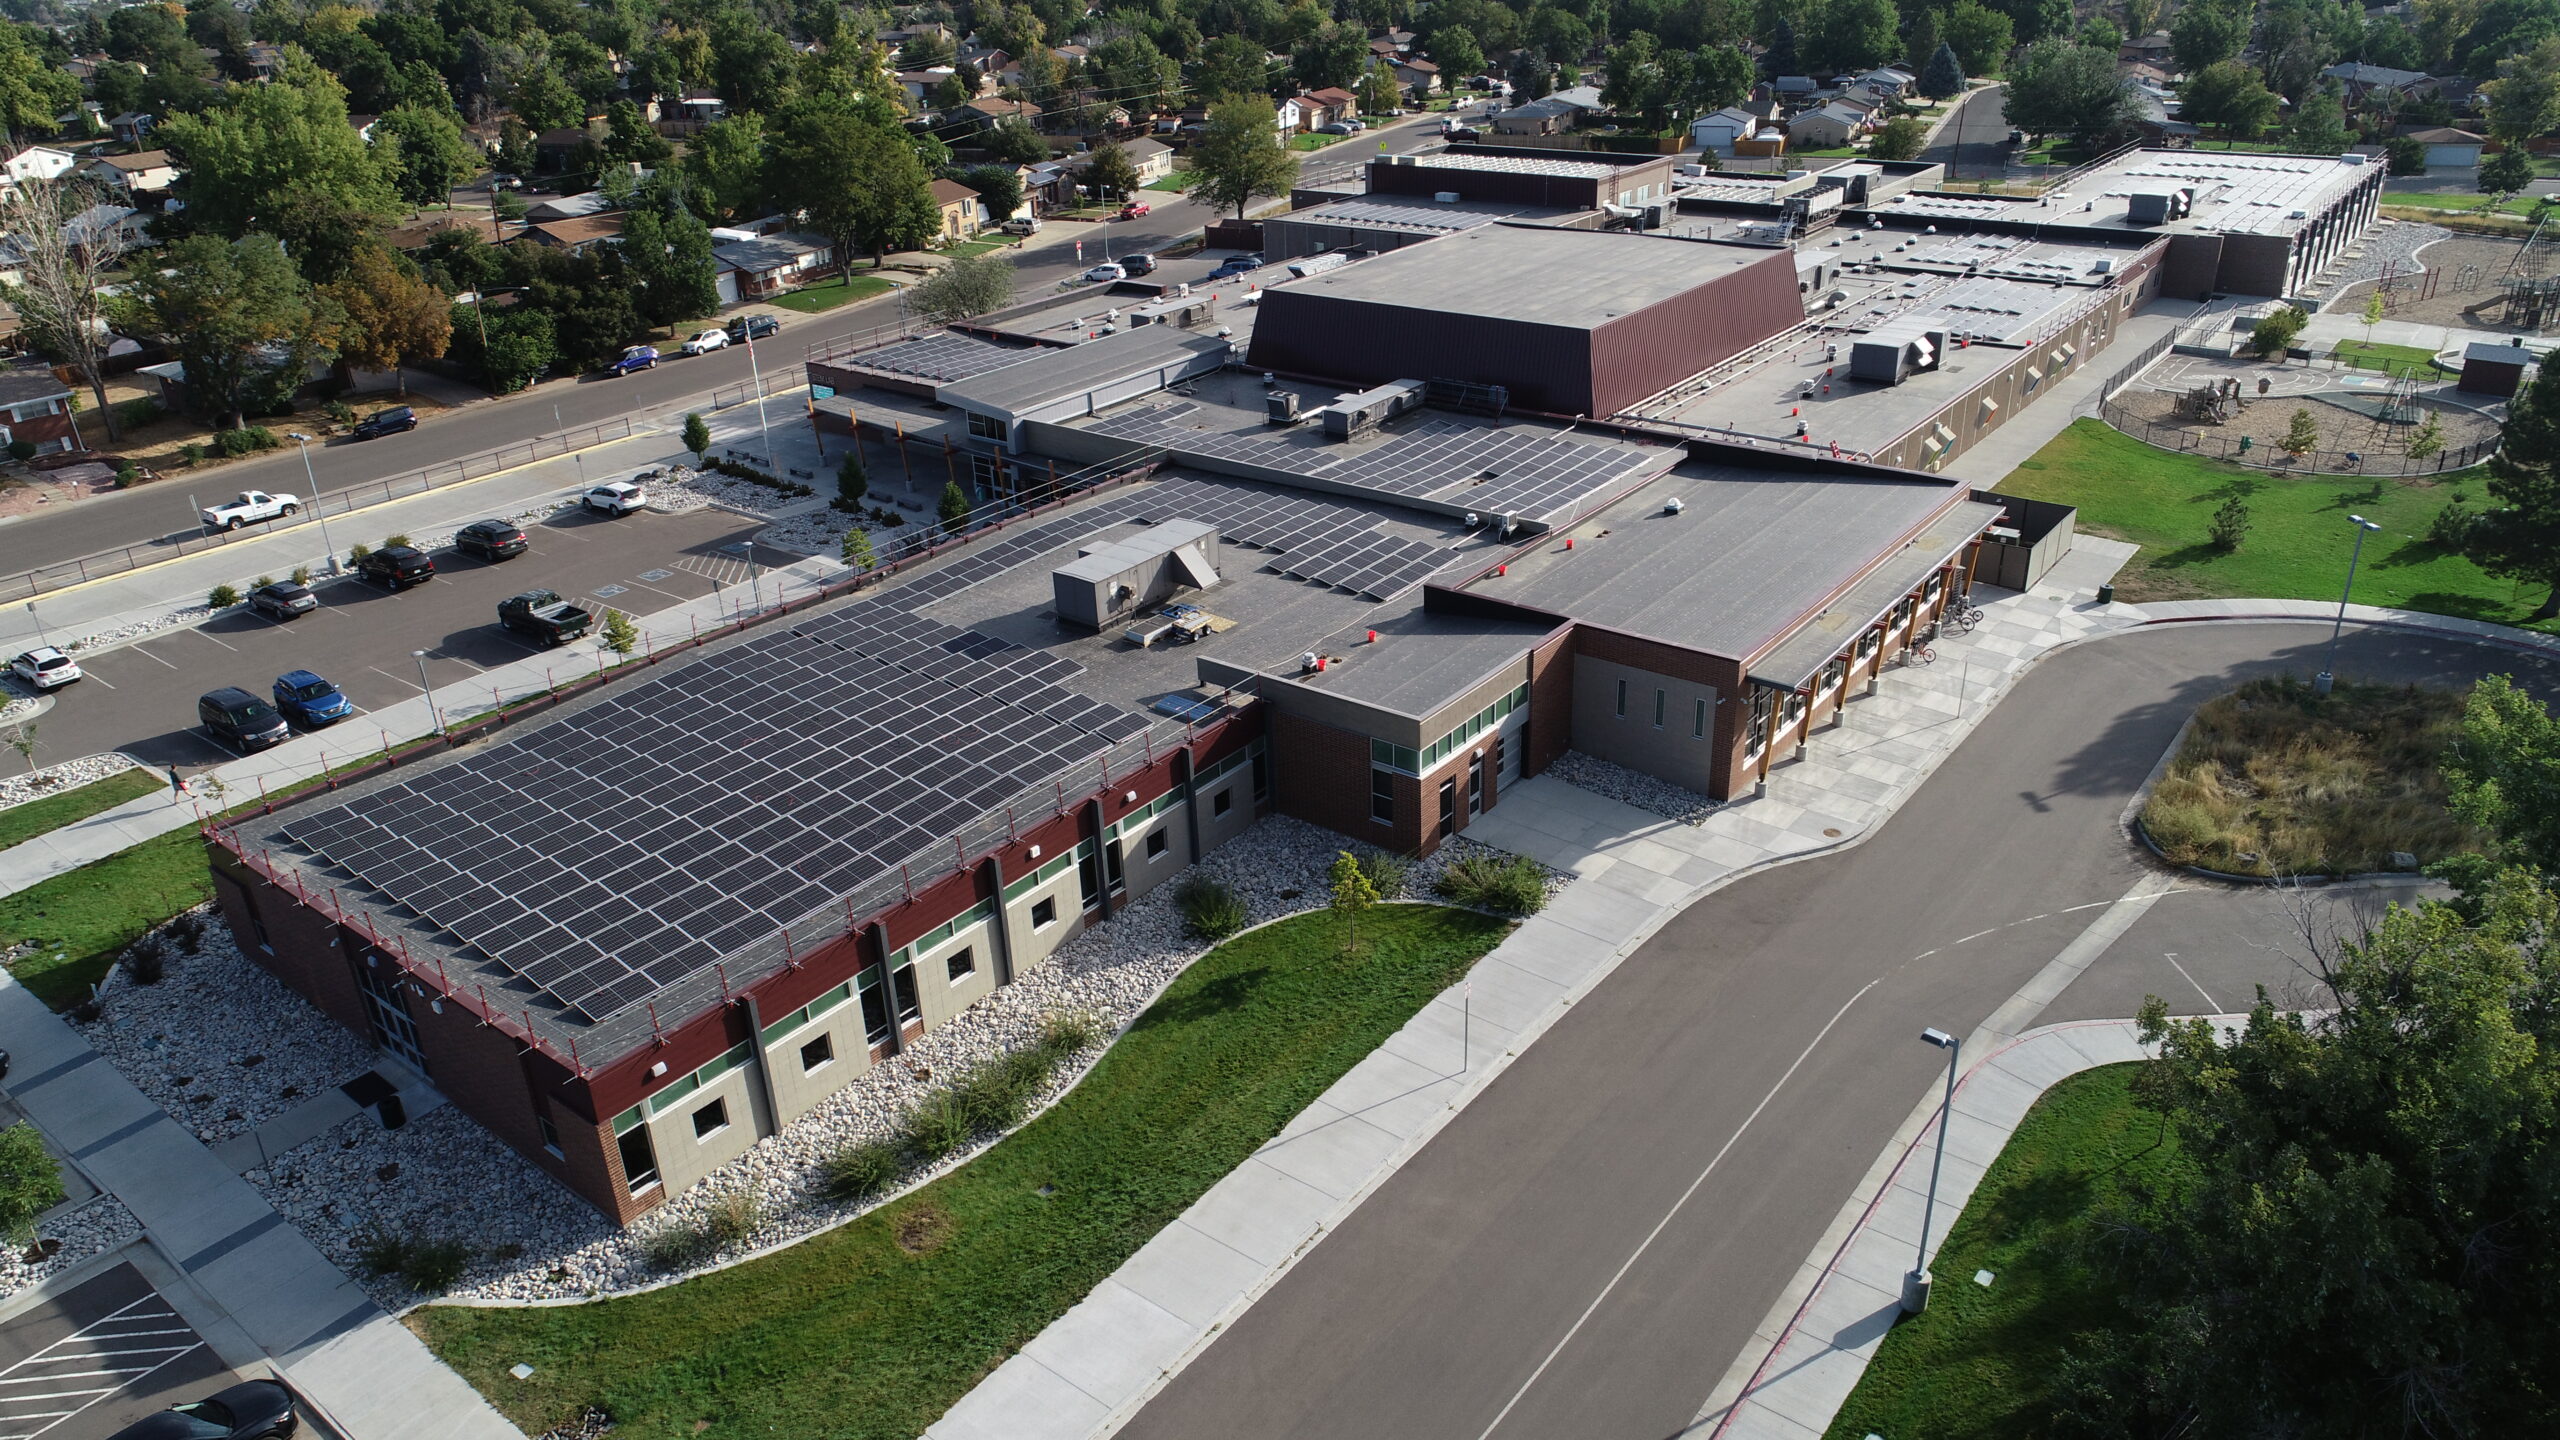 Aerial of School Roof with Solar Panels